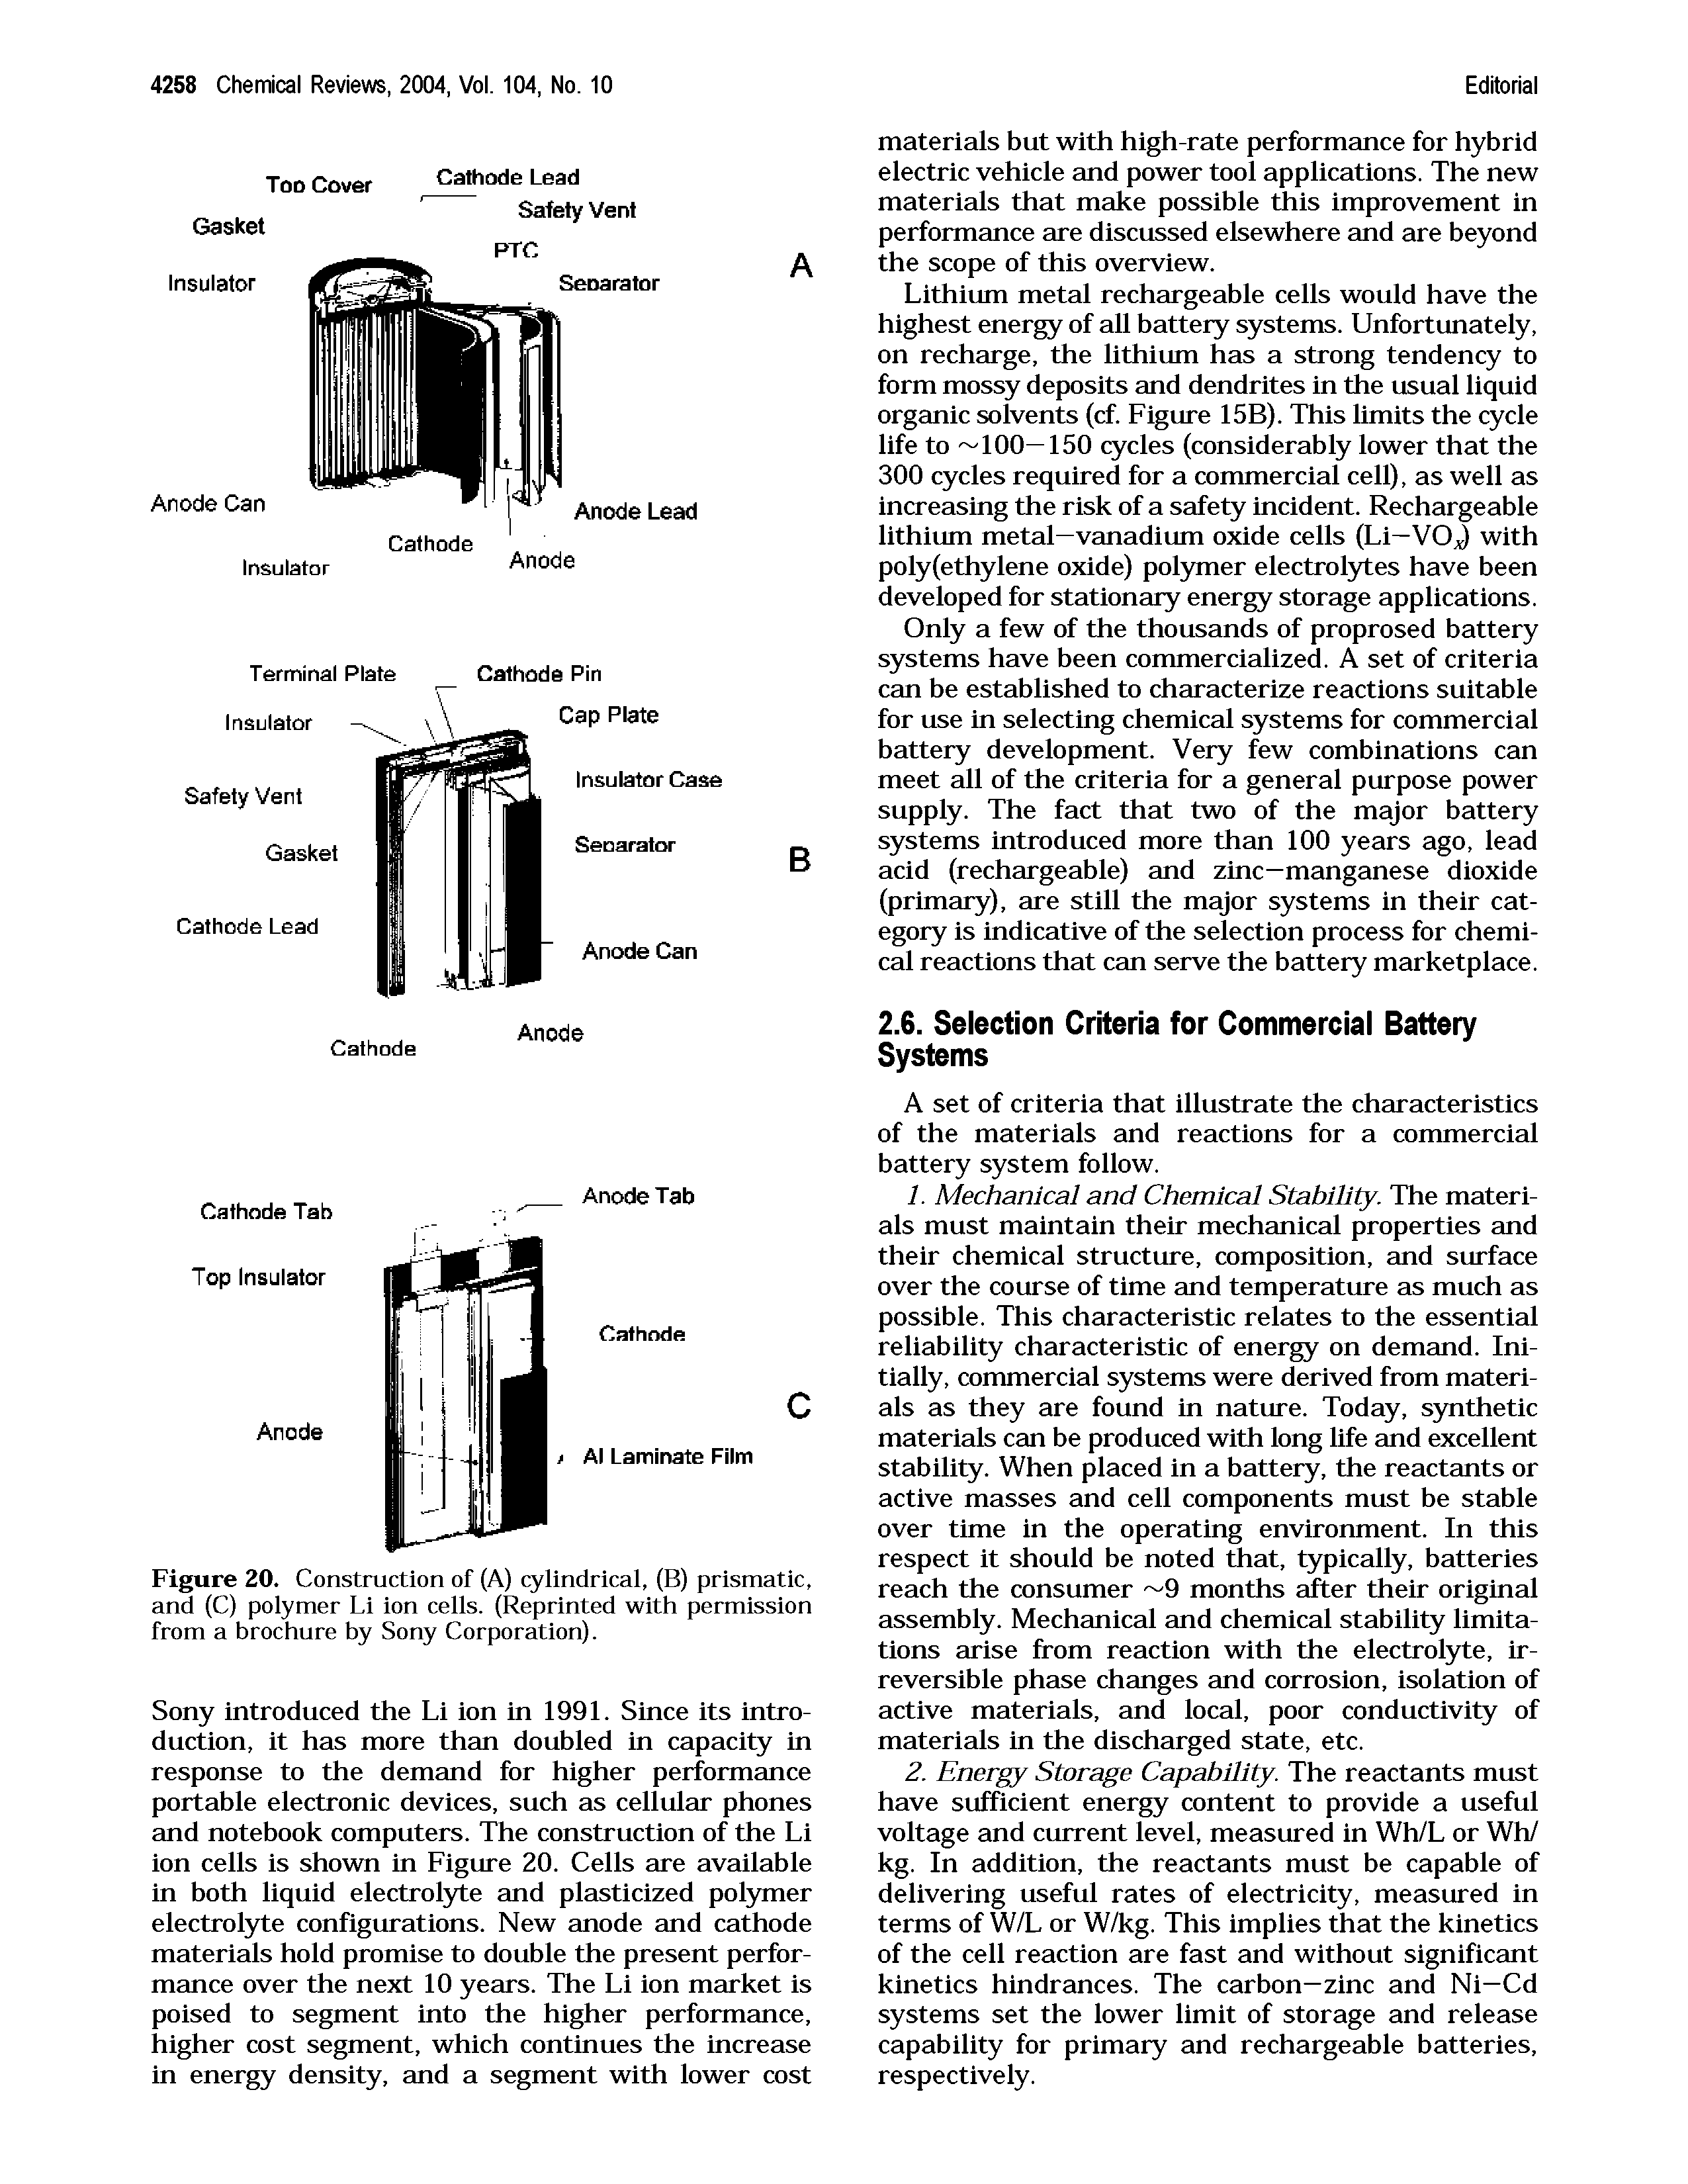 Figure 20. Construction of (A) cylindrical, (B) prismatic, and (C) polymer Li ion cells. (Reprinted with permission from a brochure by Sony Corporation).